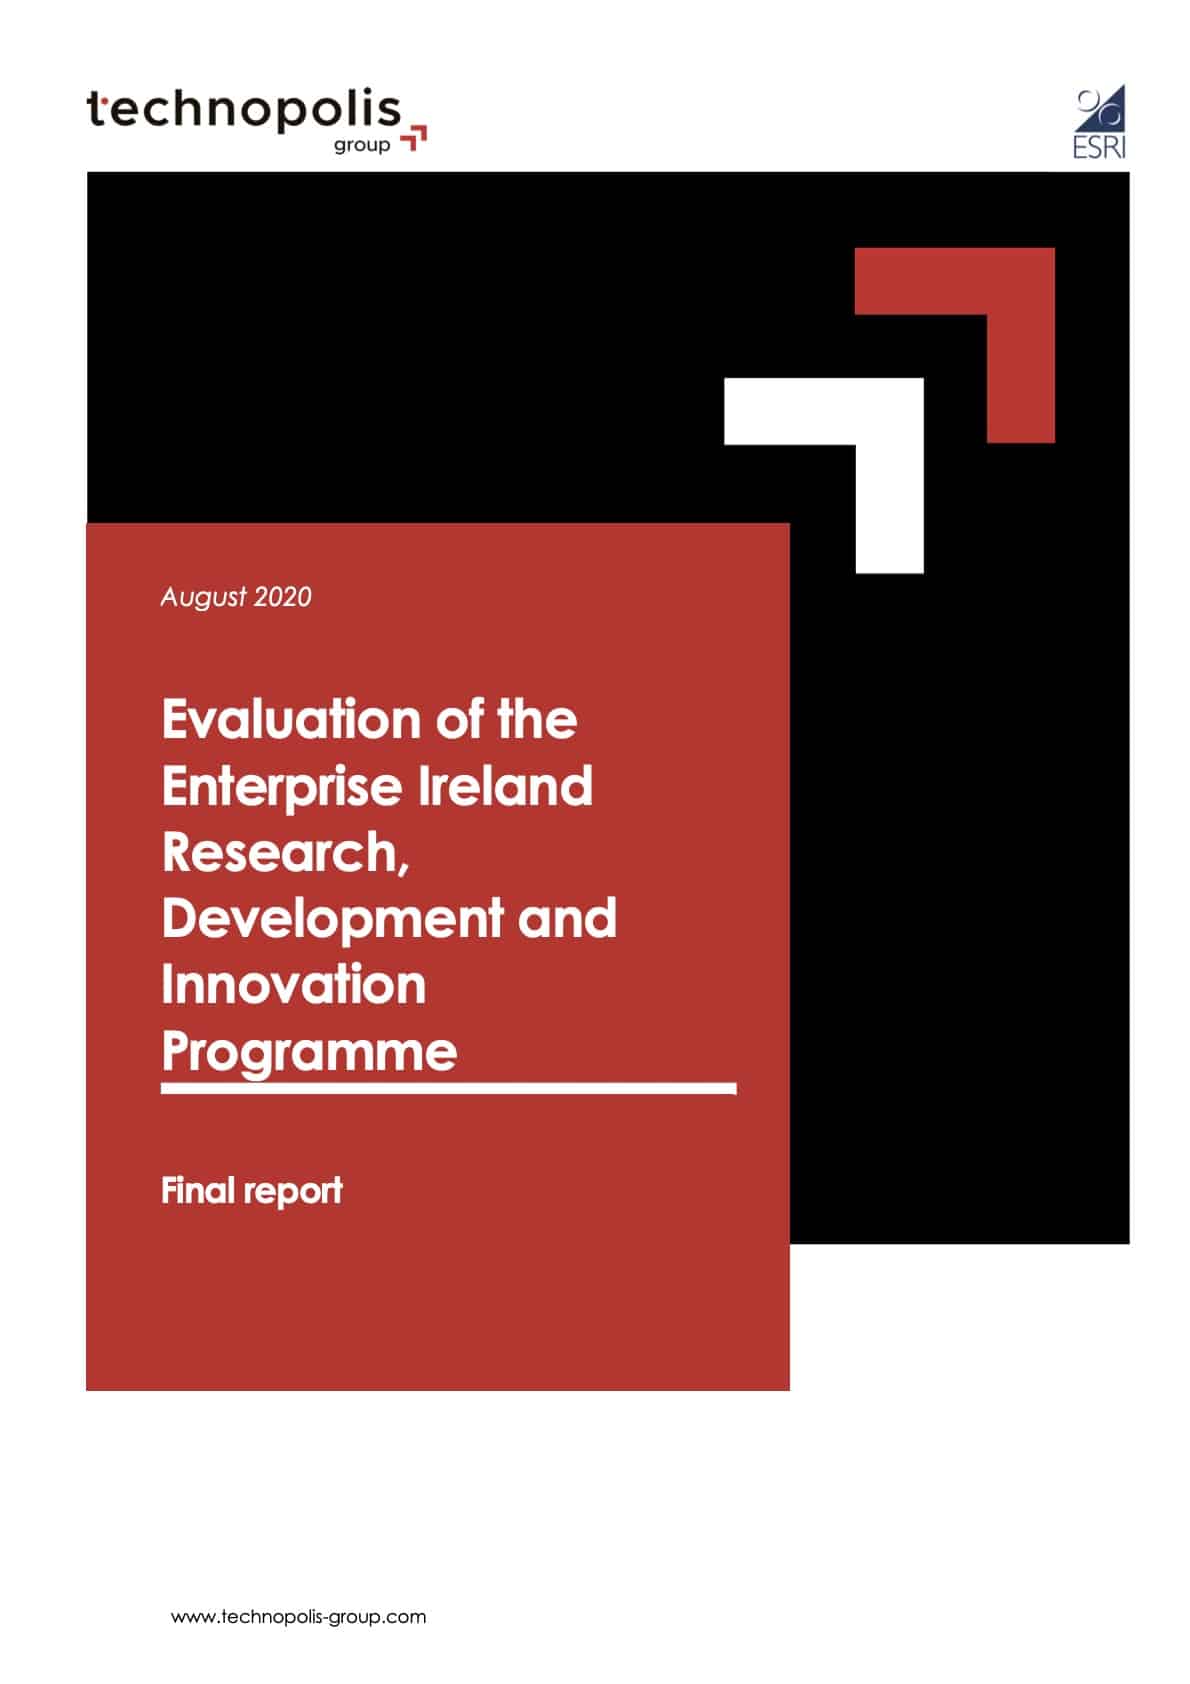 Evaluation of the Enterprise Ireland Research, Development and Innovation Programme